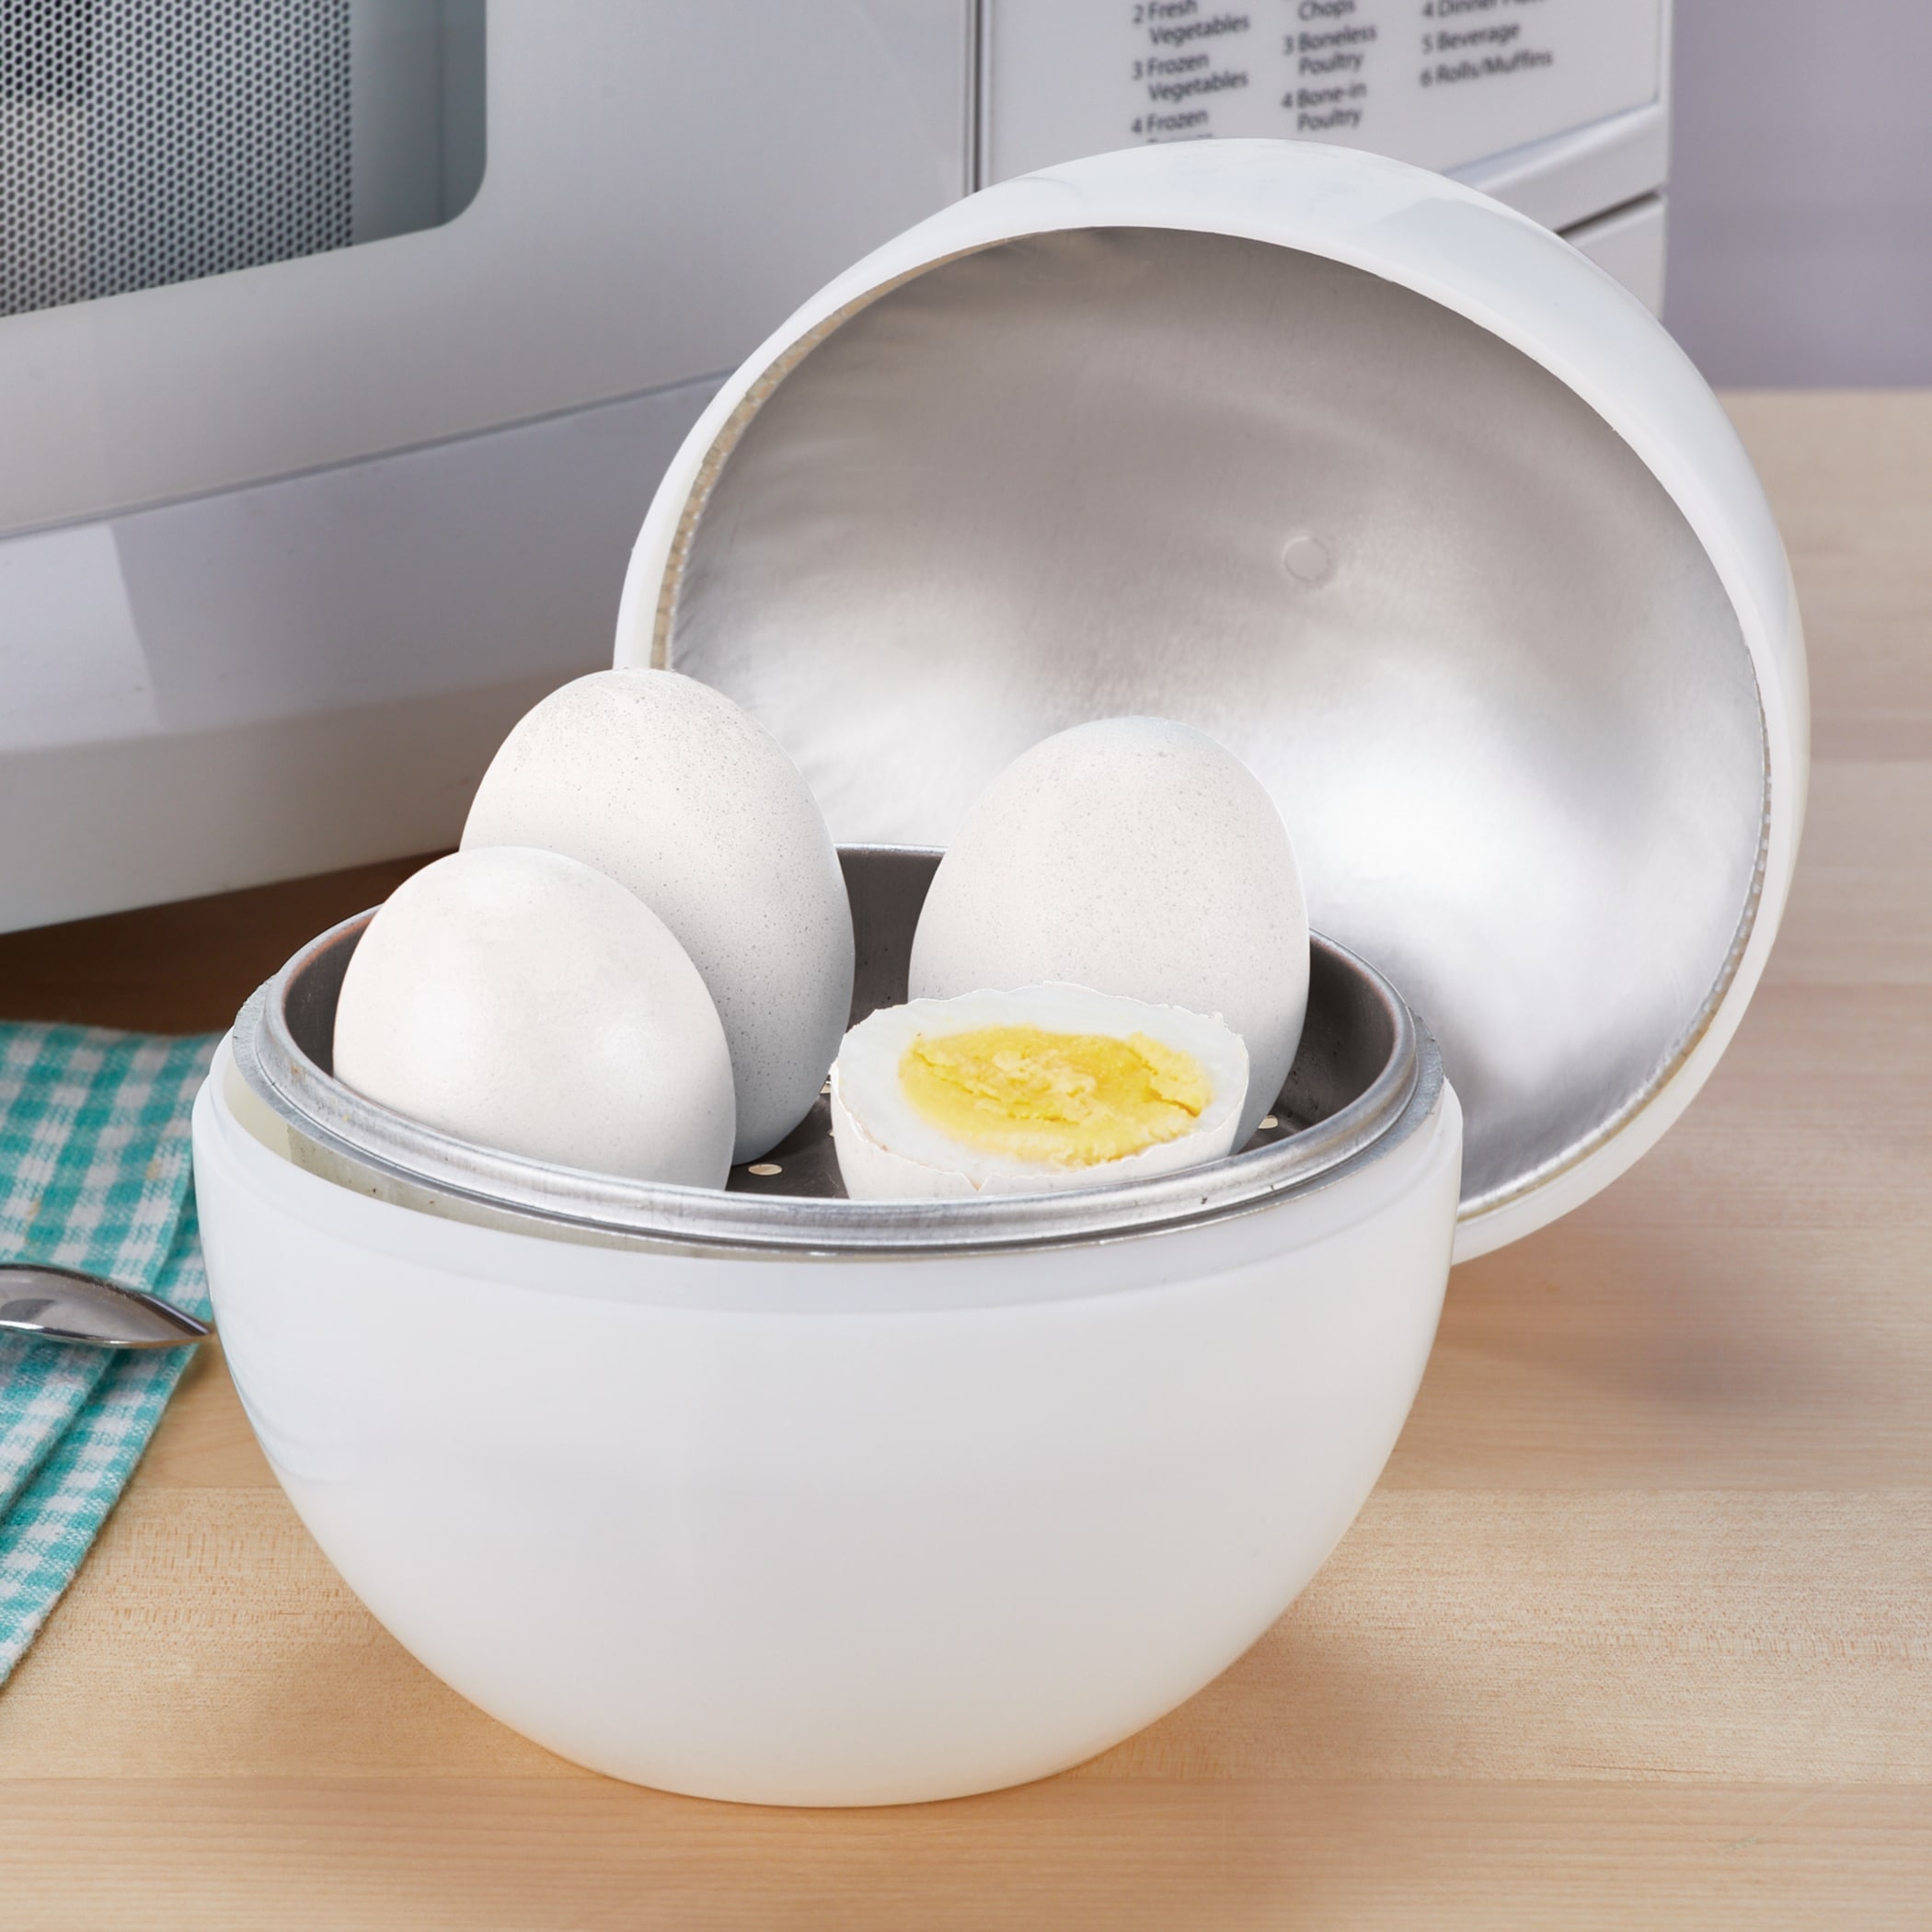 https://ak1.ostkcdn.com/images/products/is/images/direct/30f87e65a4008500fb550f416da234c4dfad0e82/Perfect-Hard-Boiled-Microwave-Egg-Cooker.jpg